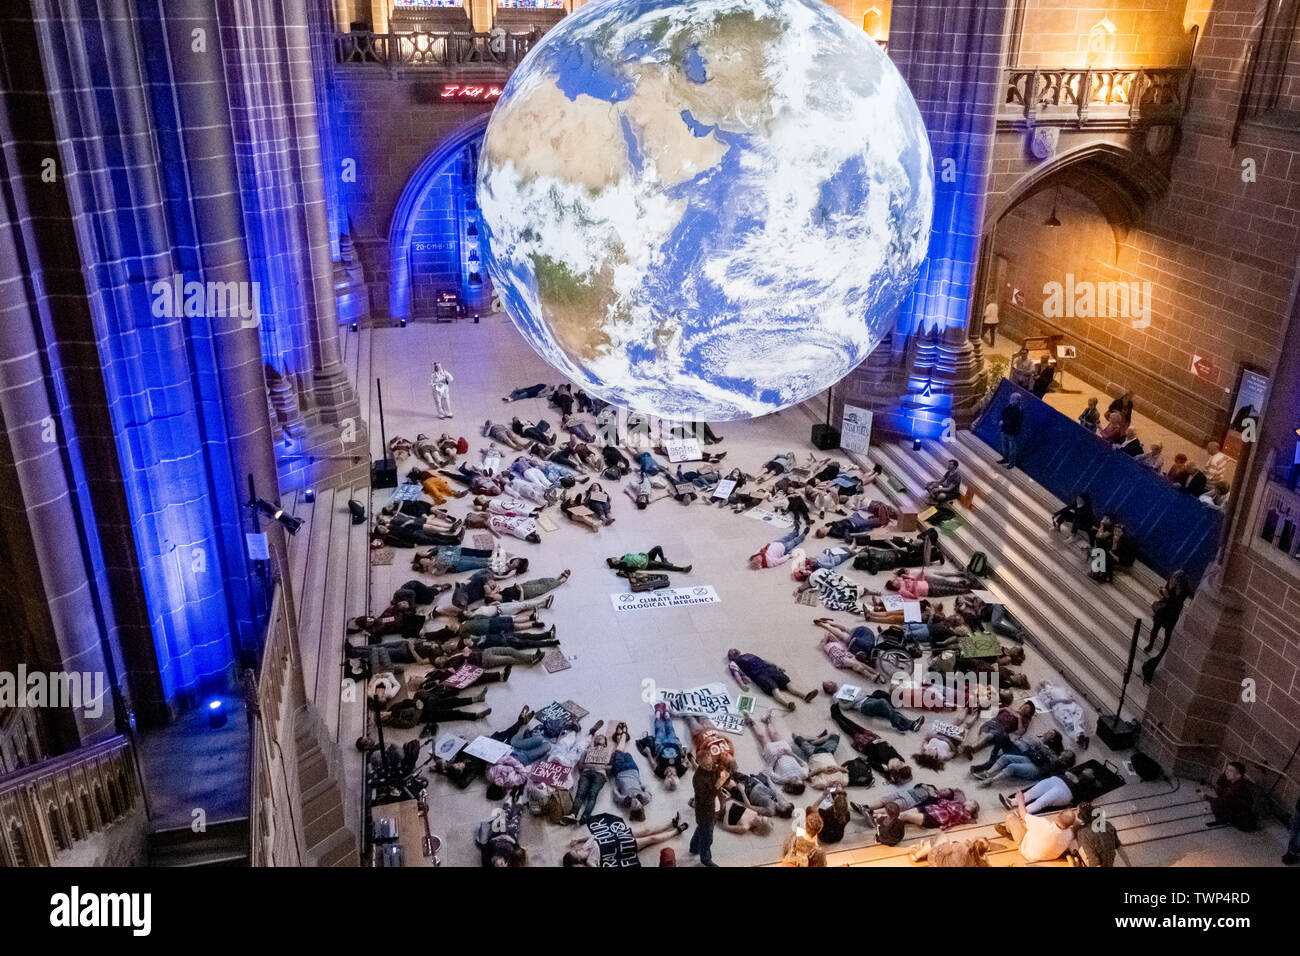 Liverpool, UK. June 22, 2019. Protesters from climate change group, Extinction Rebellion, hold a ‘die-in’ protest at Liverpool’s Anglican Cathedral underneath Gaia, an art installation consisting of a 23ft replica of the Earth. Protesters laid down under the installation for 25 minutes which aimed to highlight lack of action on climate change. Credit: Christopher Middleton/Alamy Live News Stock Photo